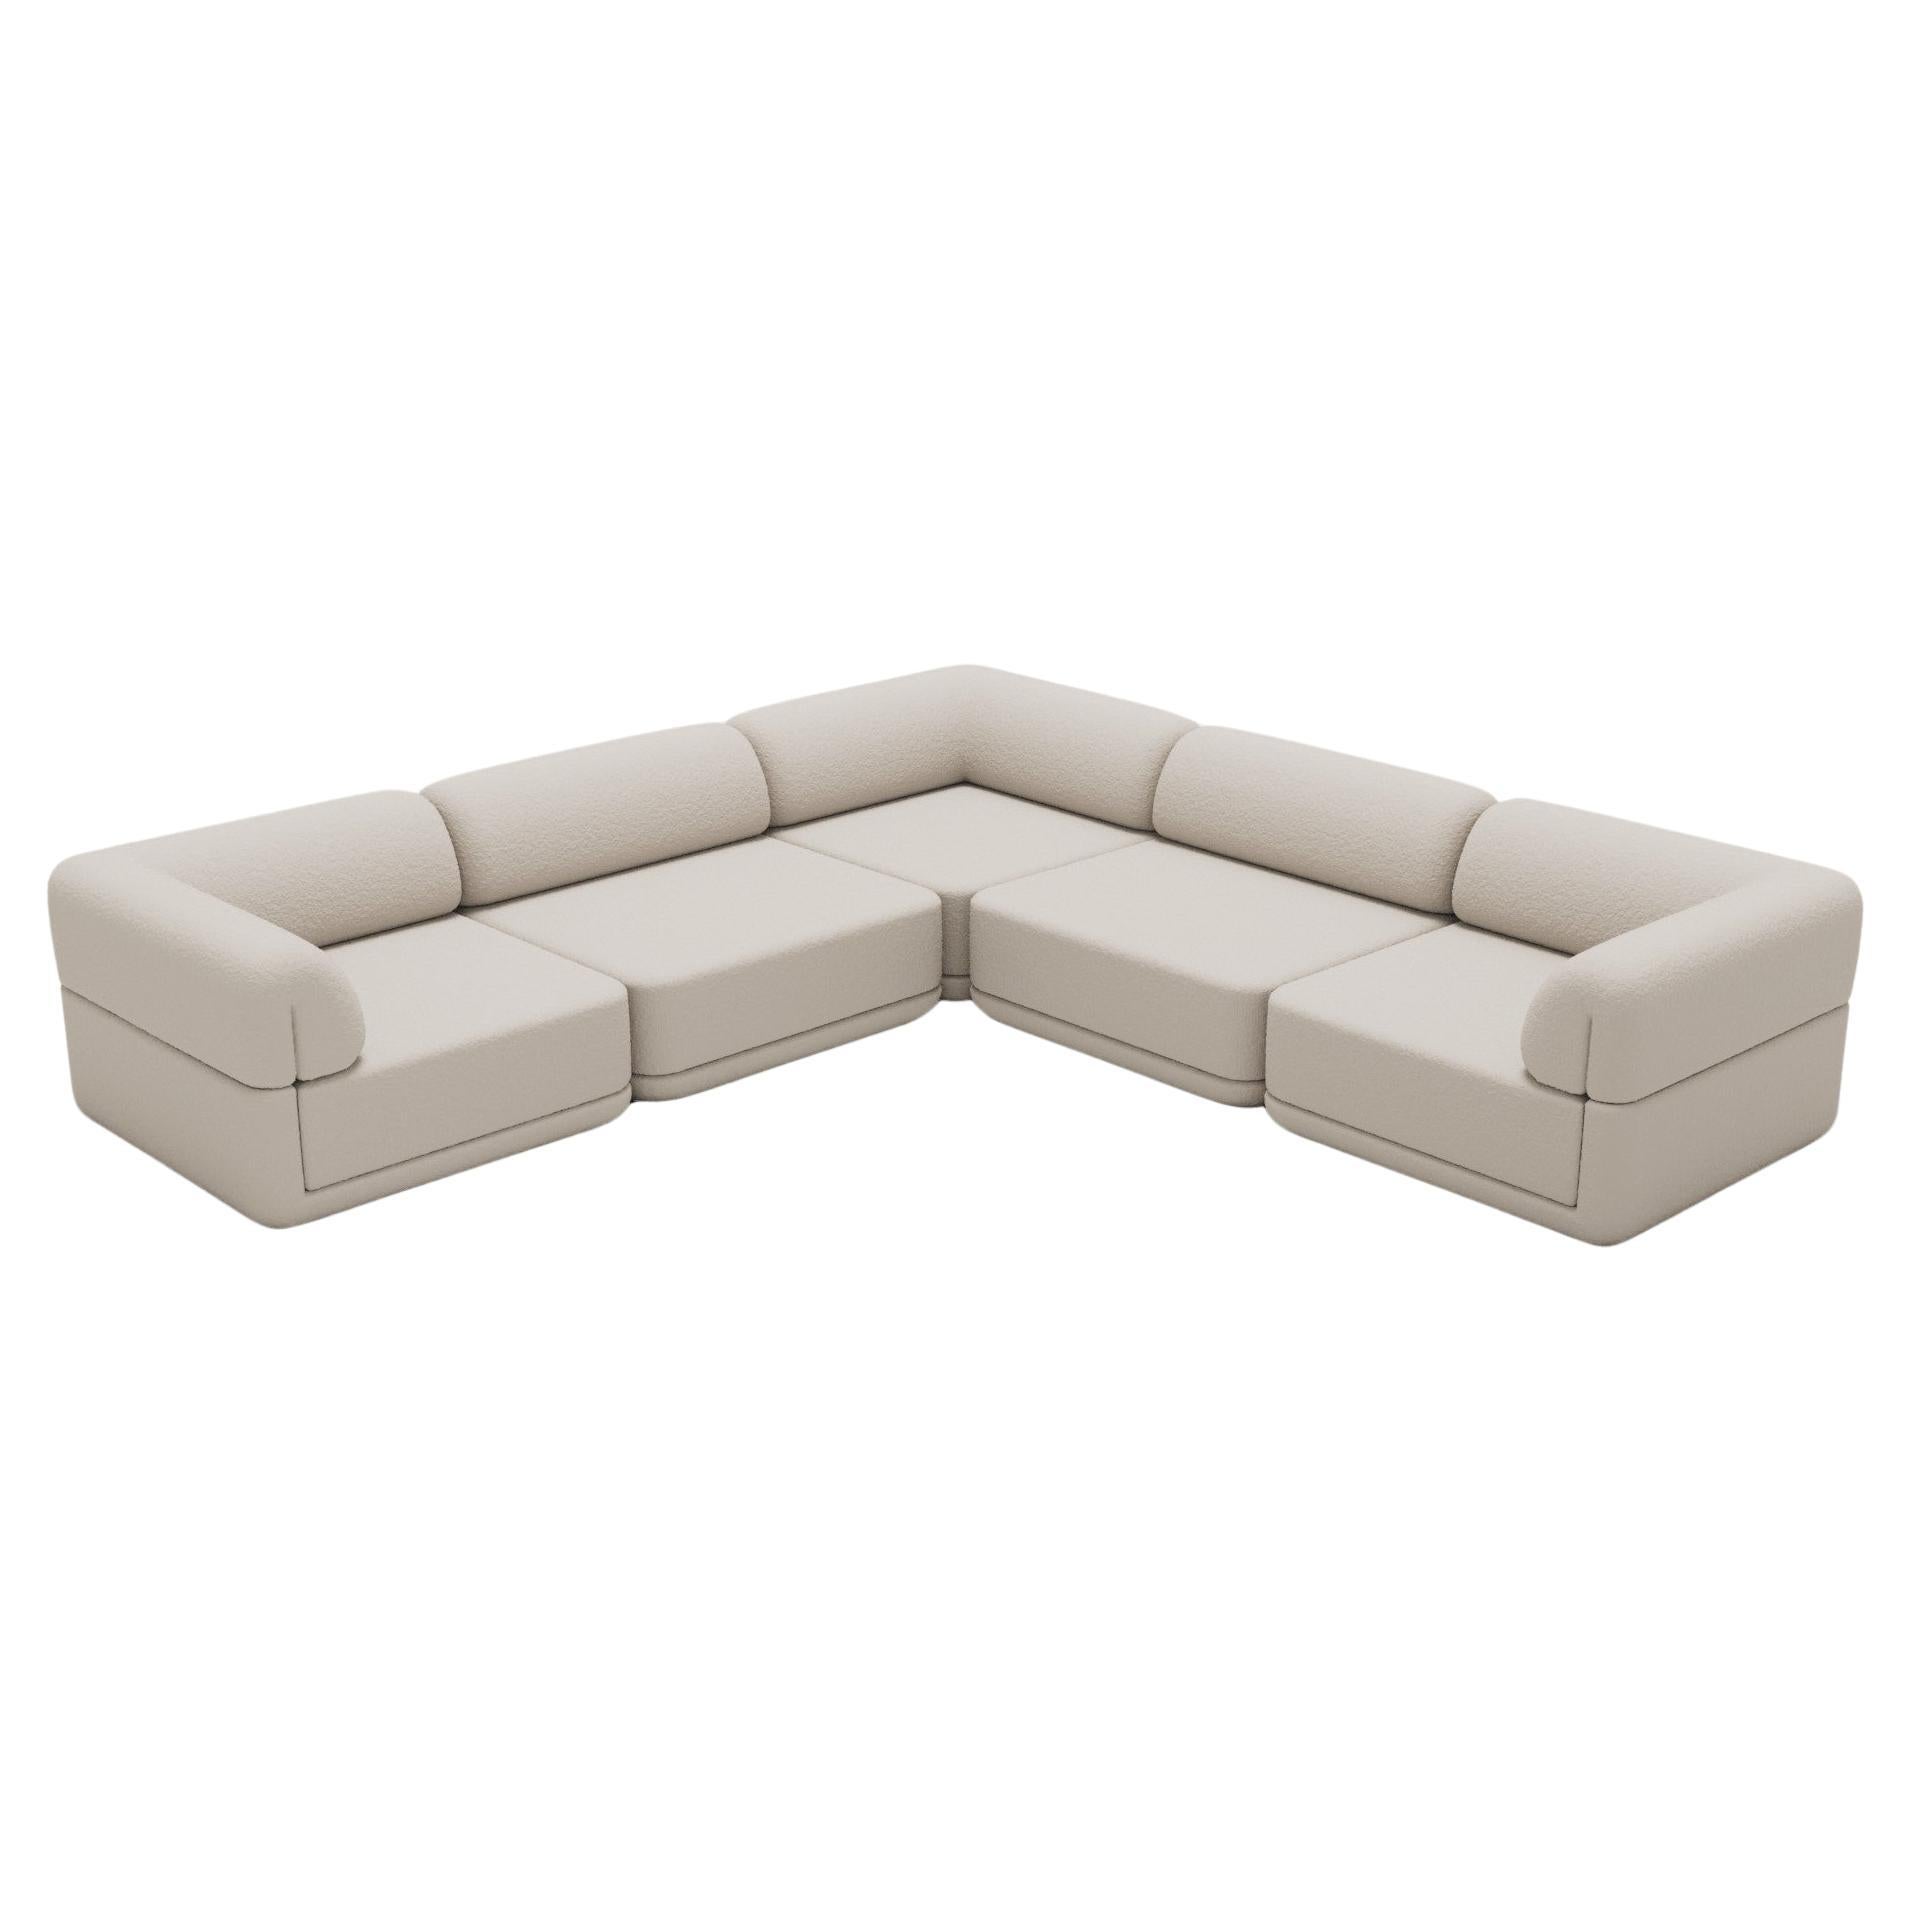 The Cube Sofa - Corner Lounge Sectional